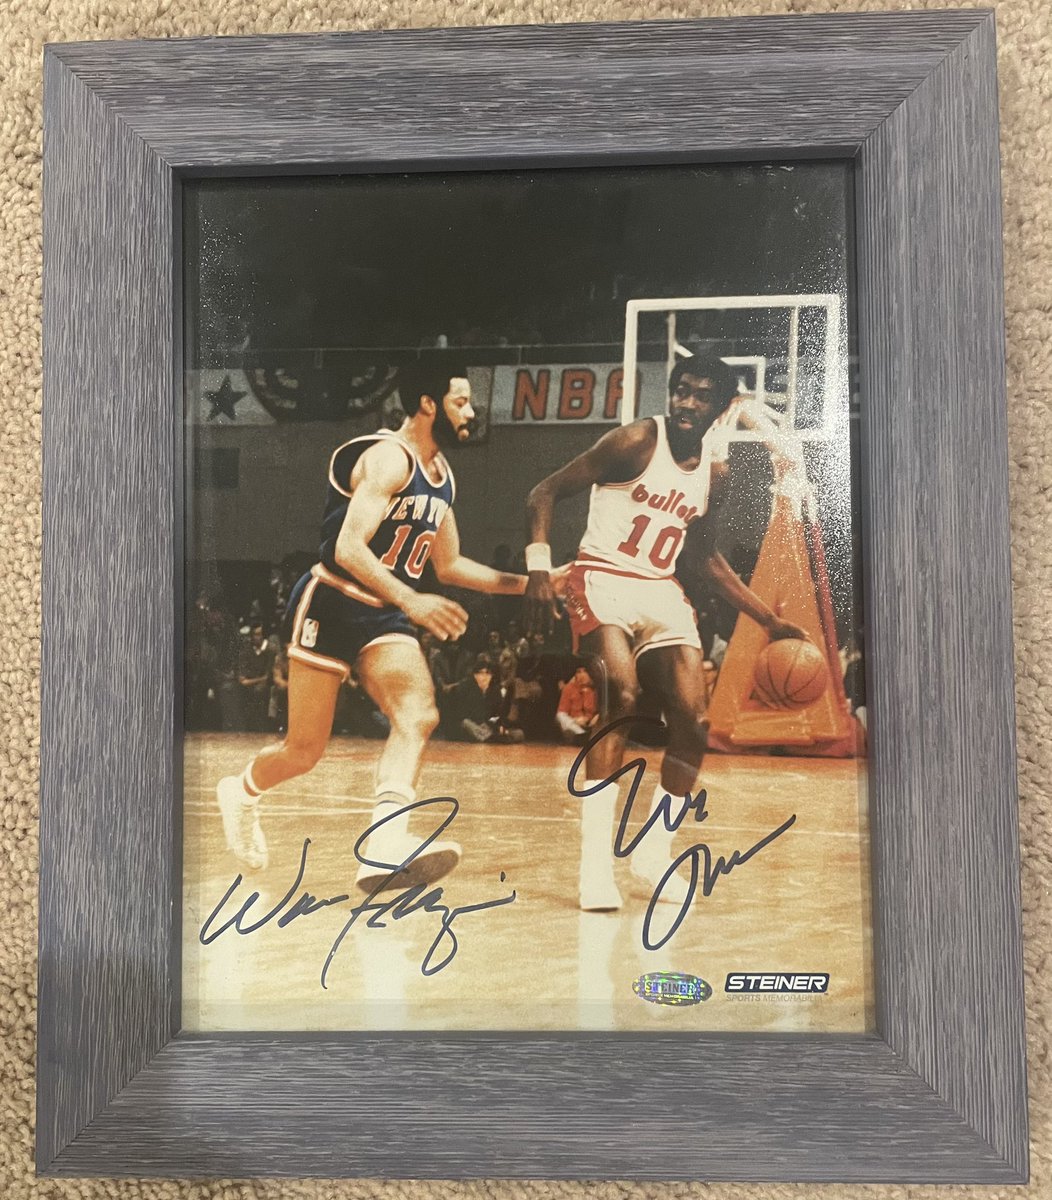 I am star struck right now… The legend @RealEarlMonroe just followed me! 🤯

One of my favorite pieces of sports memorabilia in my collection features both Earl “The Pearl” Monroe and Walt “Clyde” Frazier matching up against each other #NewYorkForever